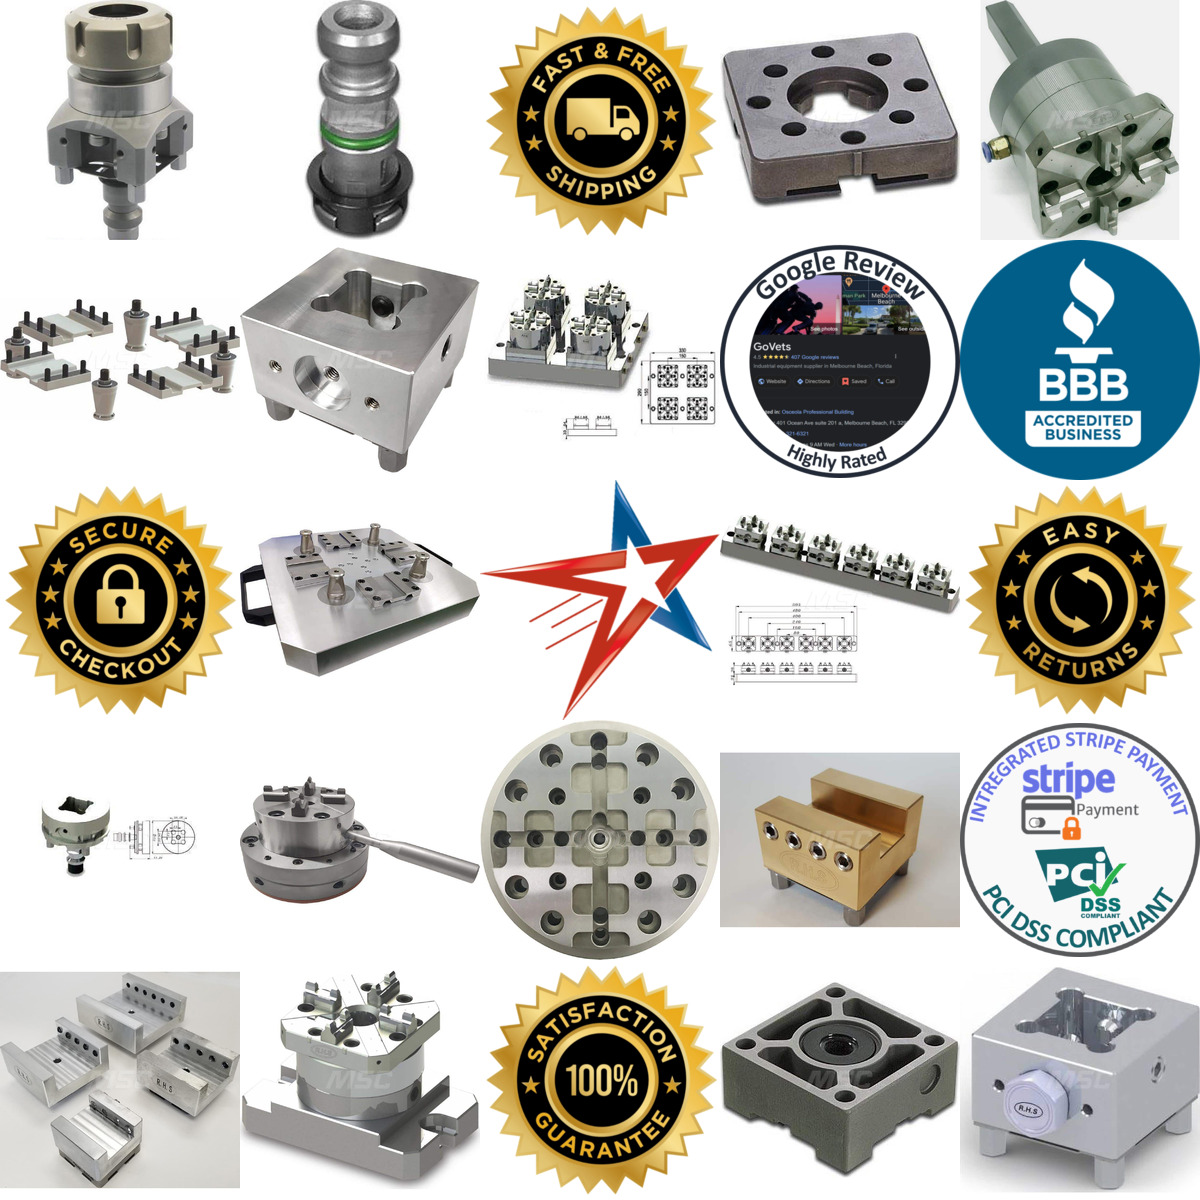 A selection of Edm Workholding products on GoVets